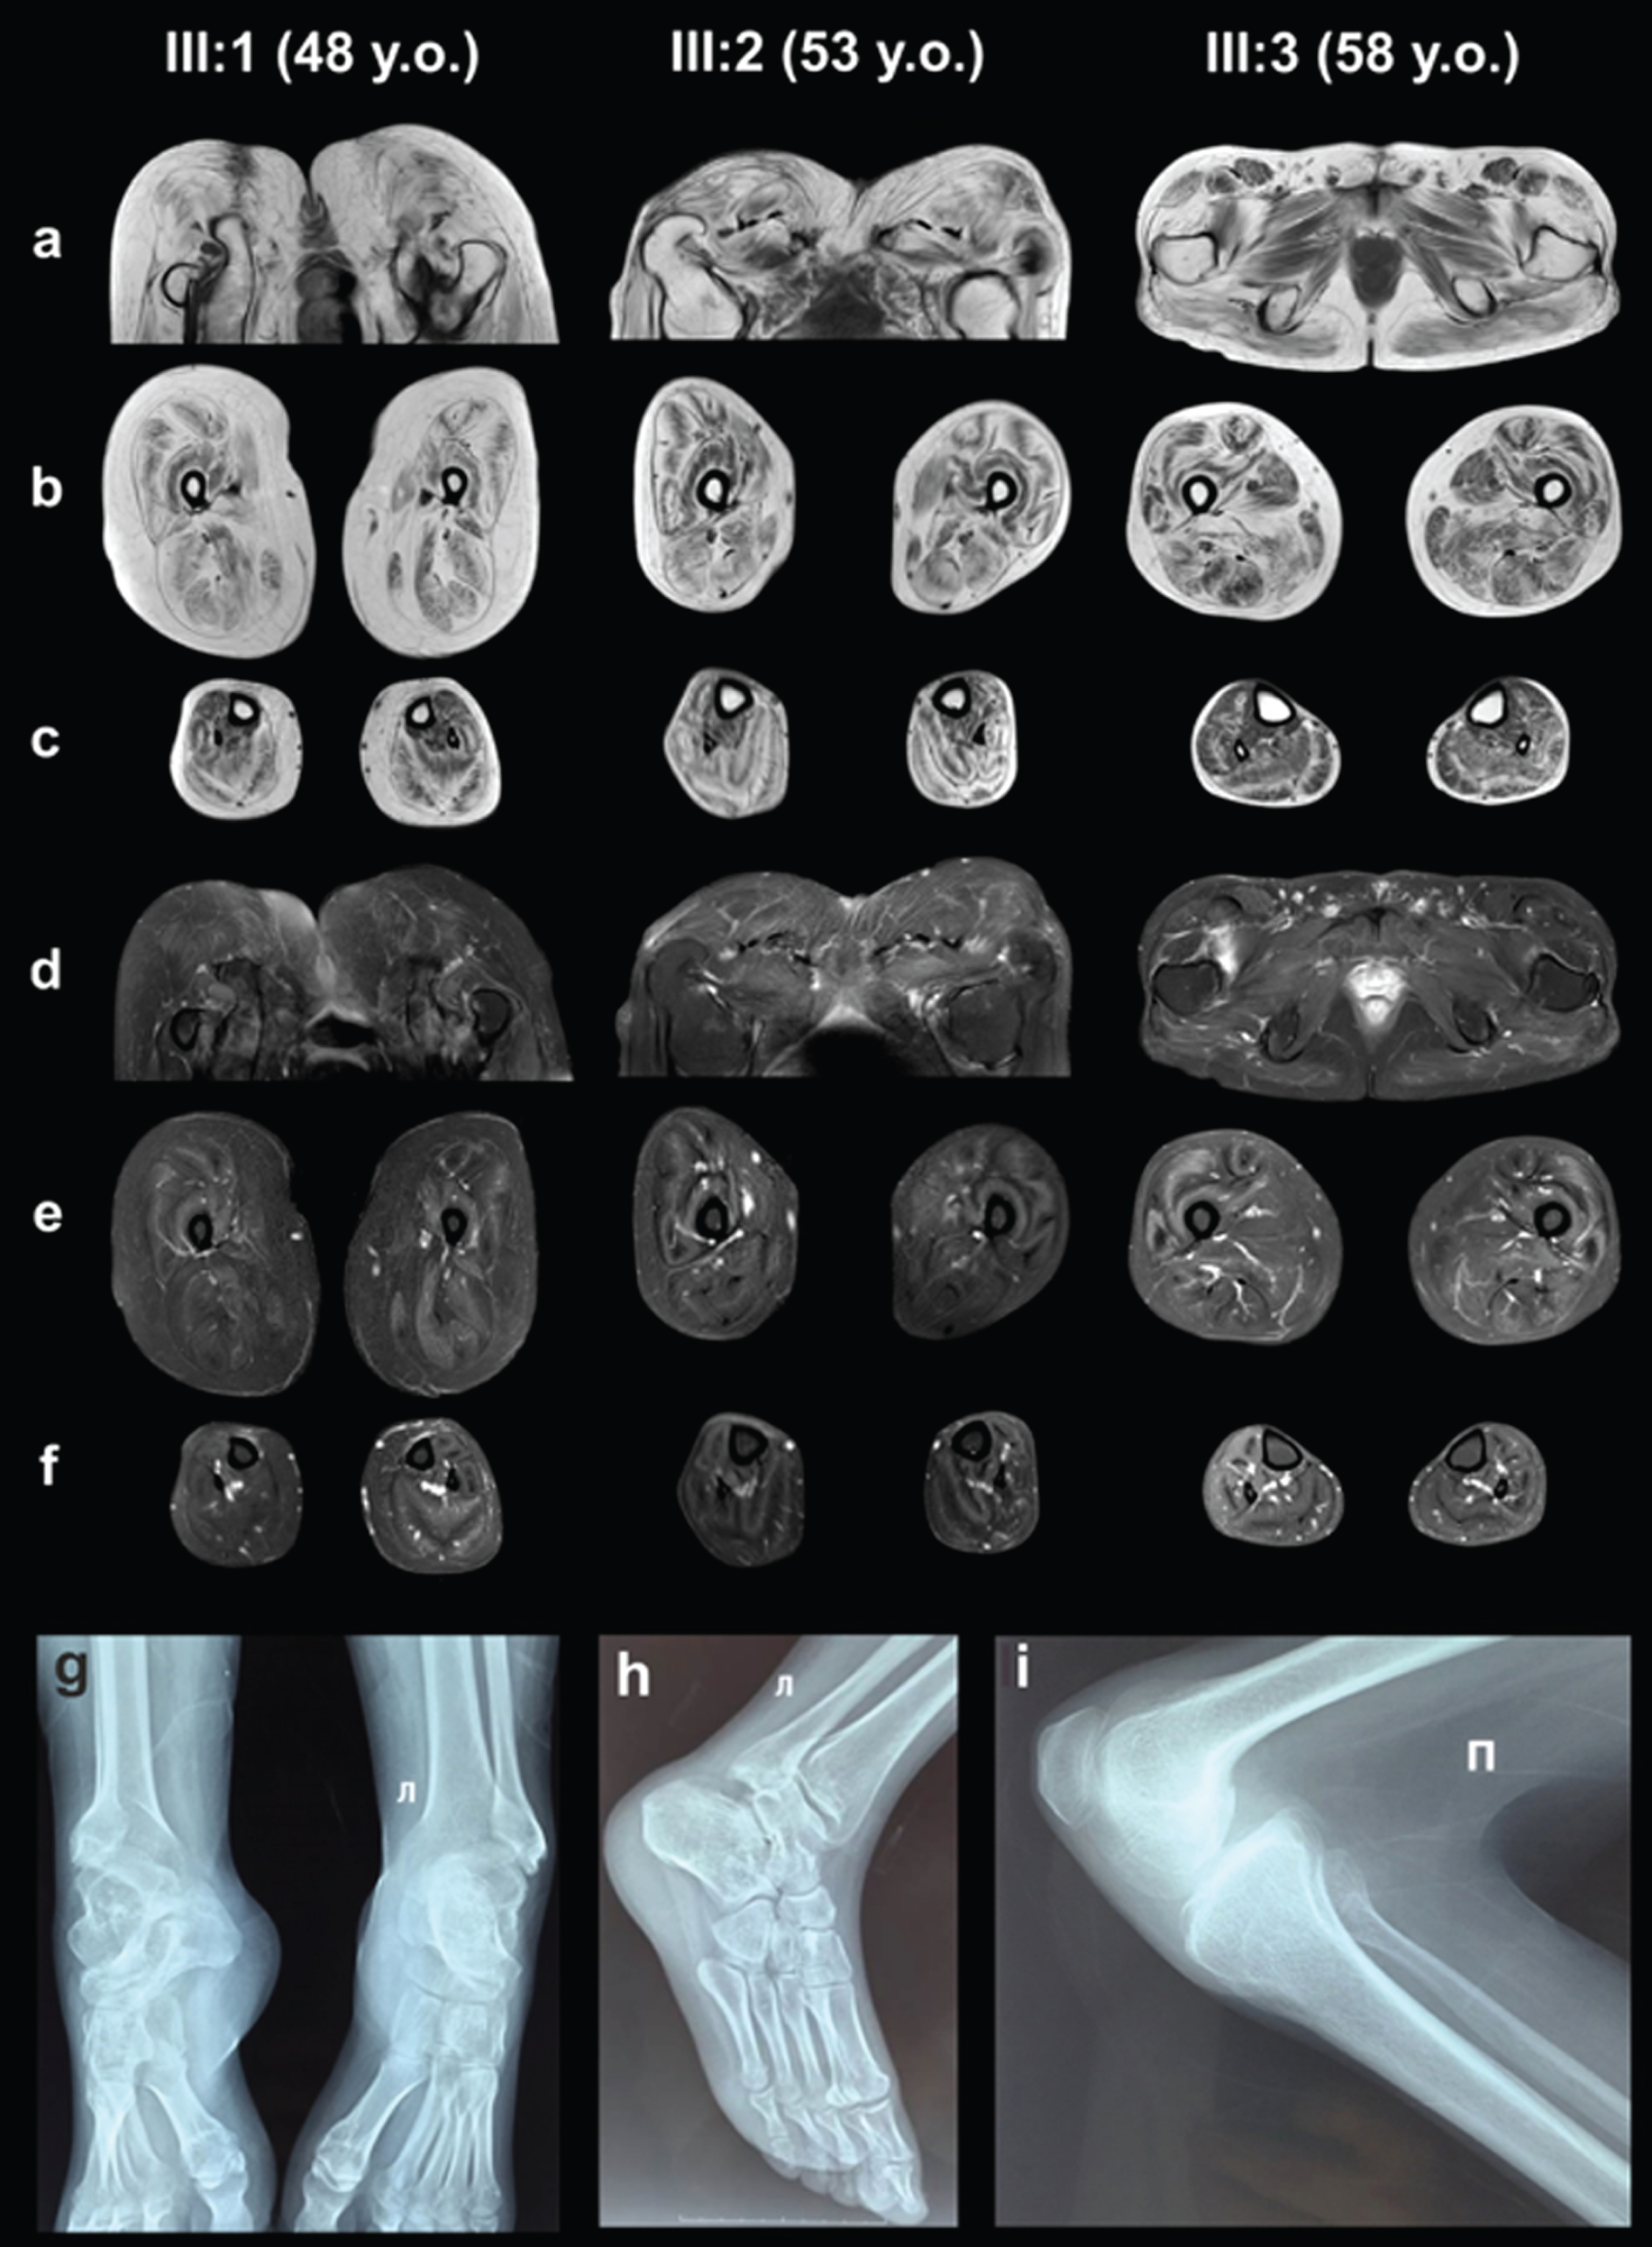 MRI of the pelvic girdle and lower extremities muscles (a, b, c –T1-WI, d, e, f –T2-WI FatSat). X-ray examination of the ankles (g, h –Patient III:1, 48 years old) and knee joint (i –Patient III:2, 53 years old).